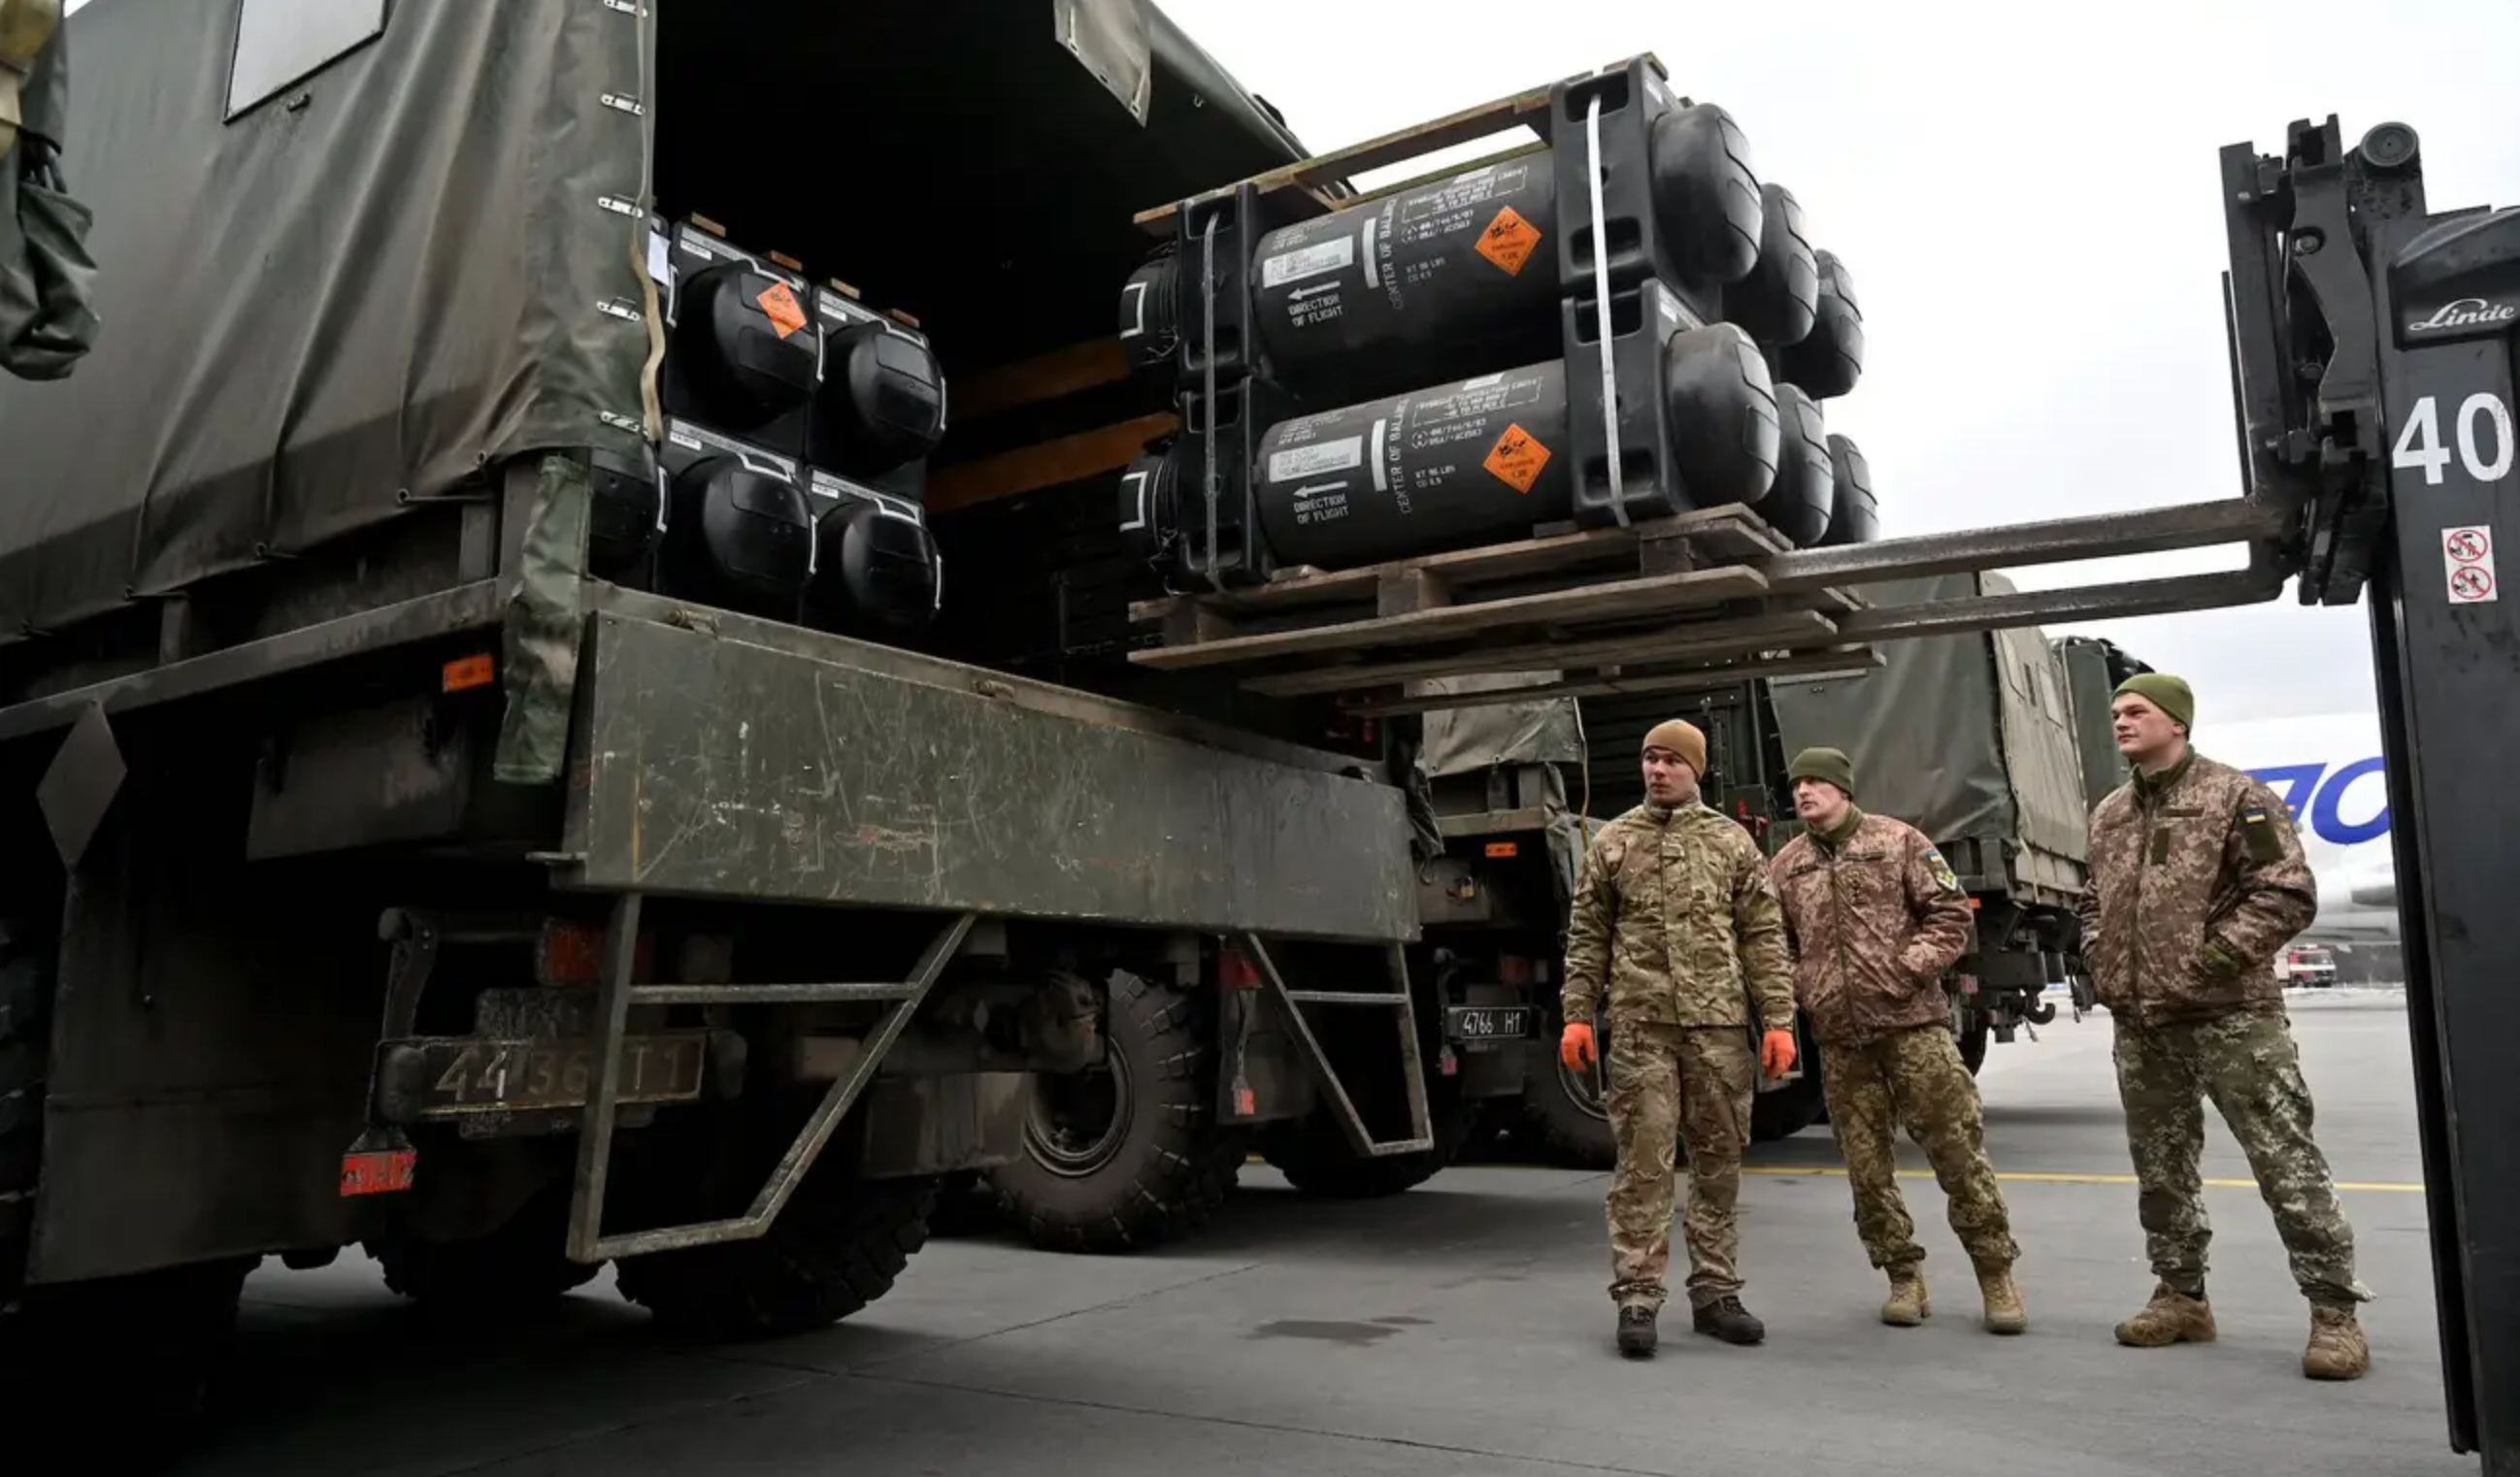 Ukrainian troops load a truck with US-made Javelins anti-tank missiles